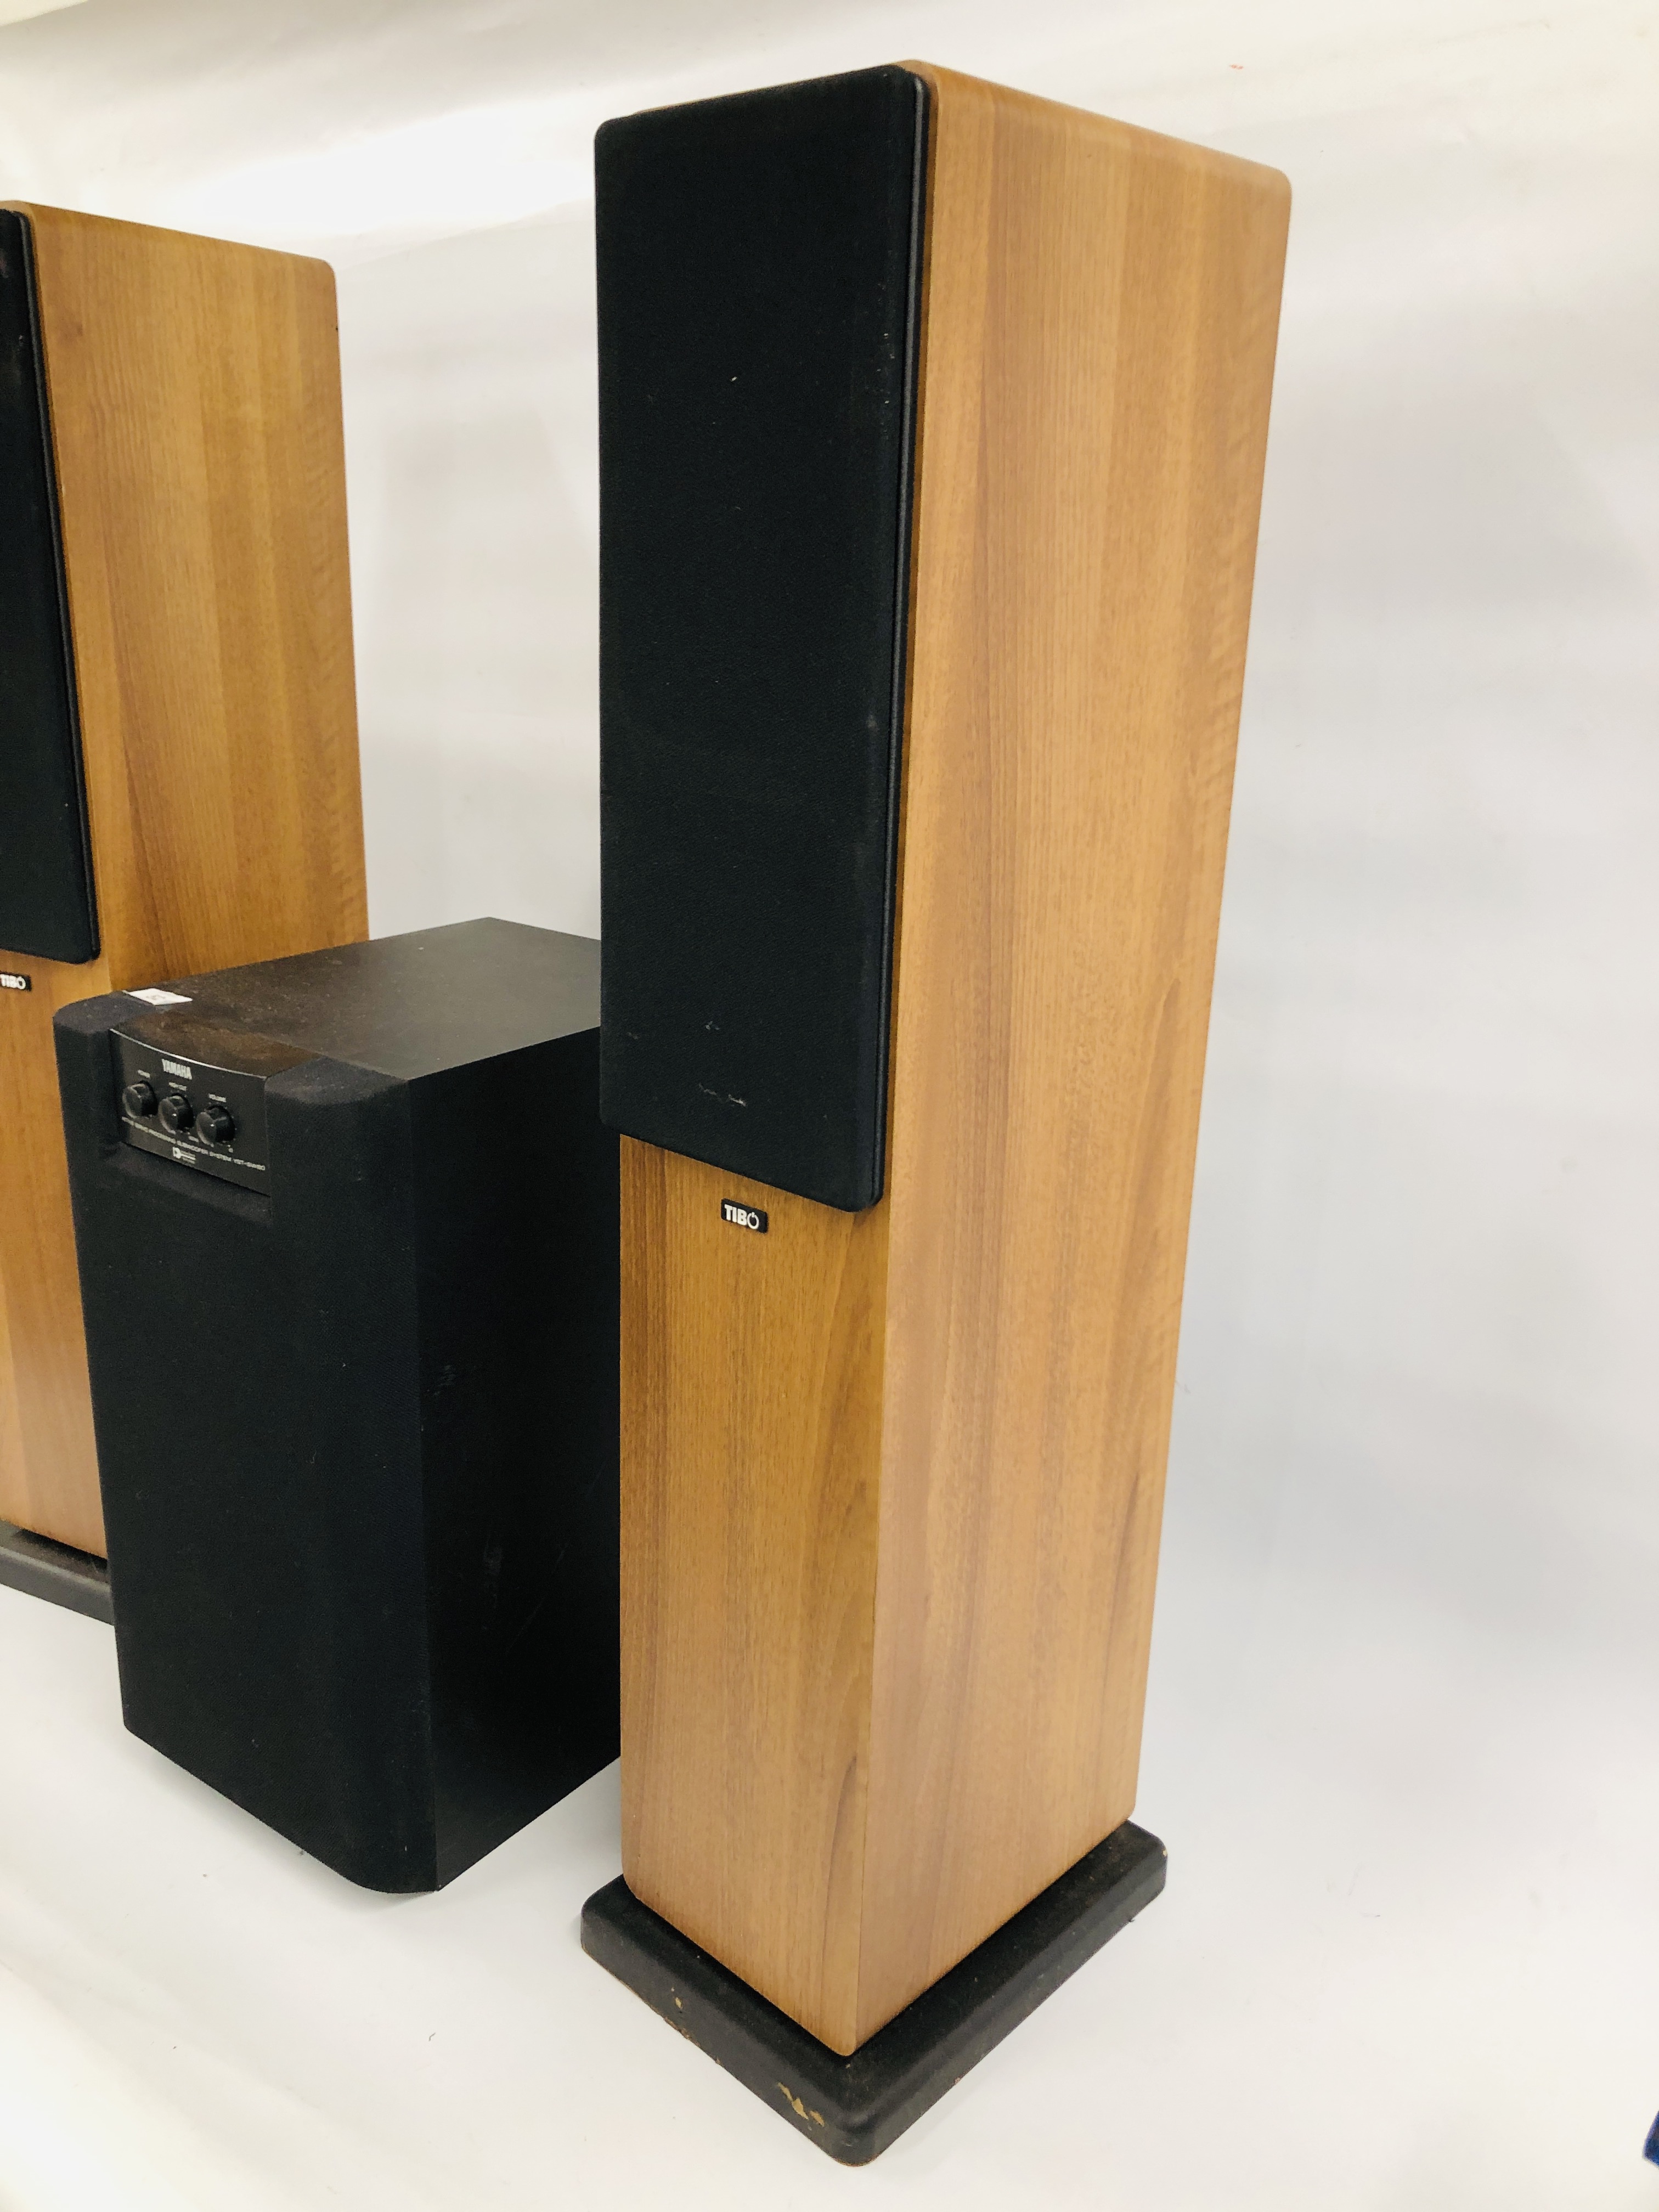 YAMAHA ACTIVE SERVO PROCESSING SUBWOOFER SYSTEM XST-SW80 ALONG WITH A PAIR OF FLOOR STANDING TIB - Image 4 of 8